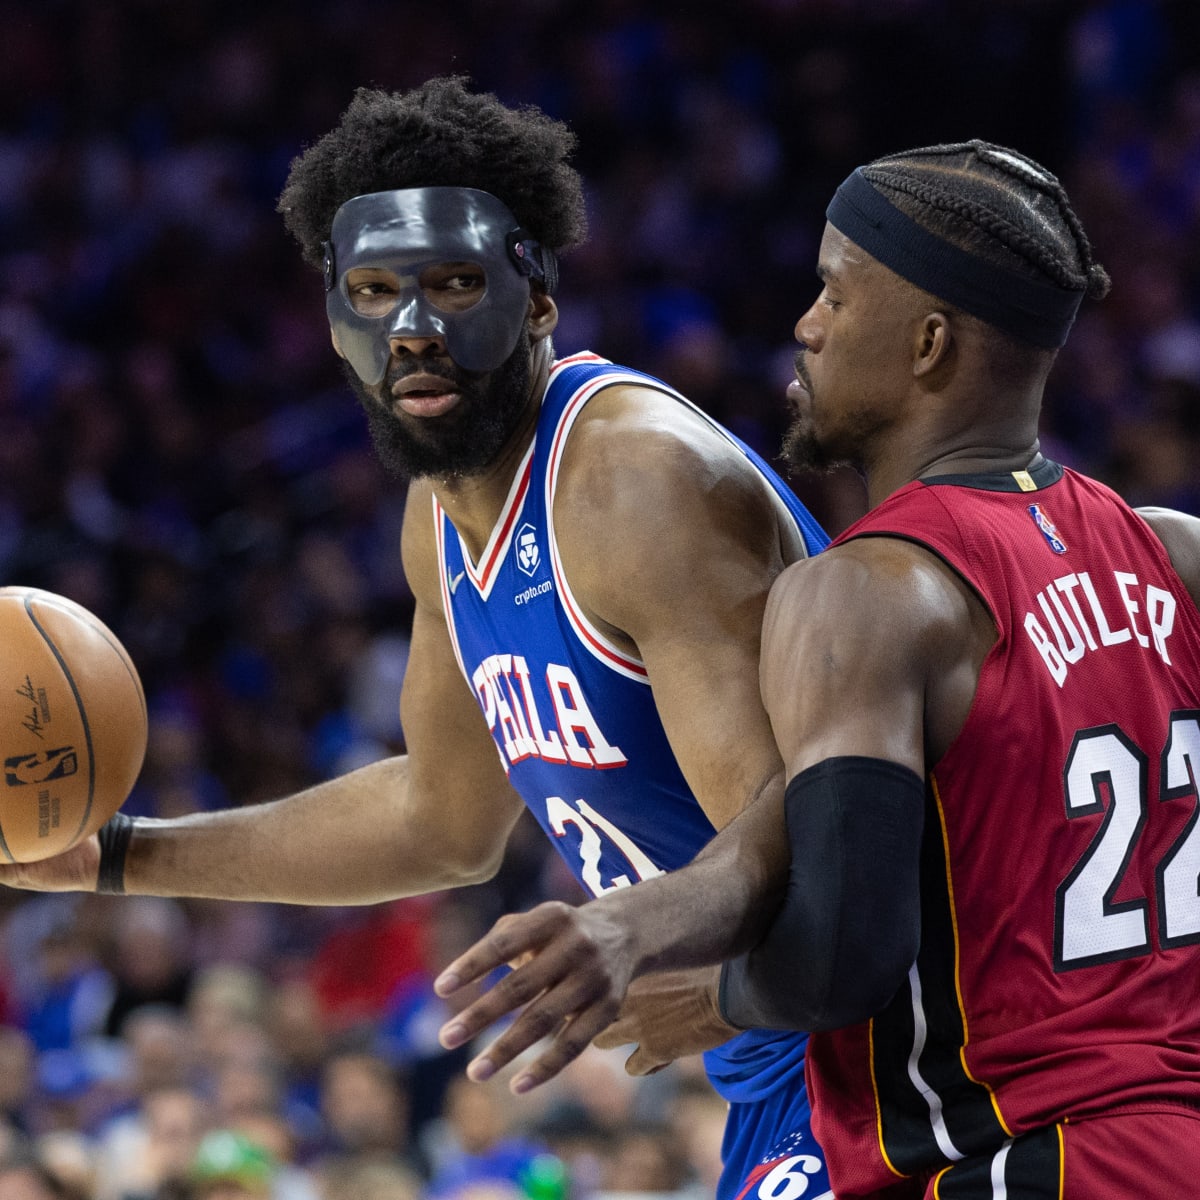 It's whatever': Joel Embiid brushes off wearing protective mask